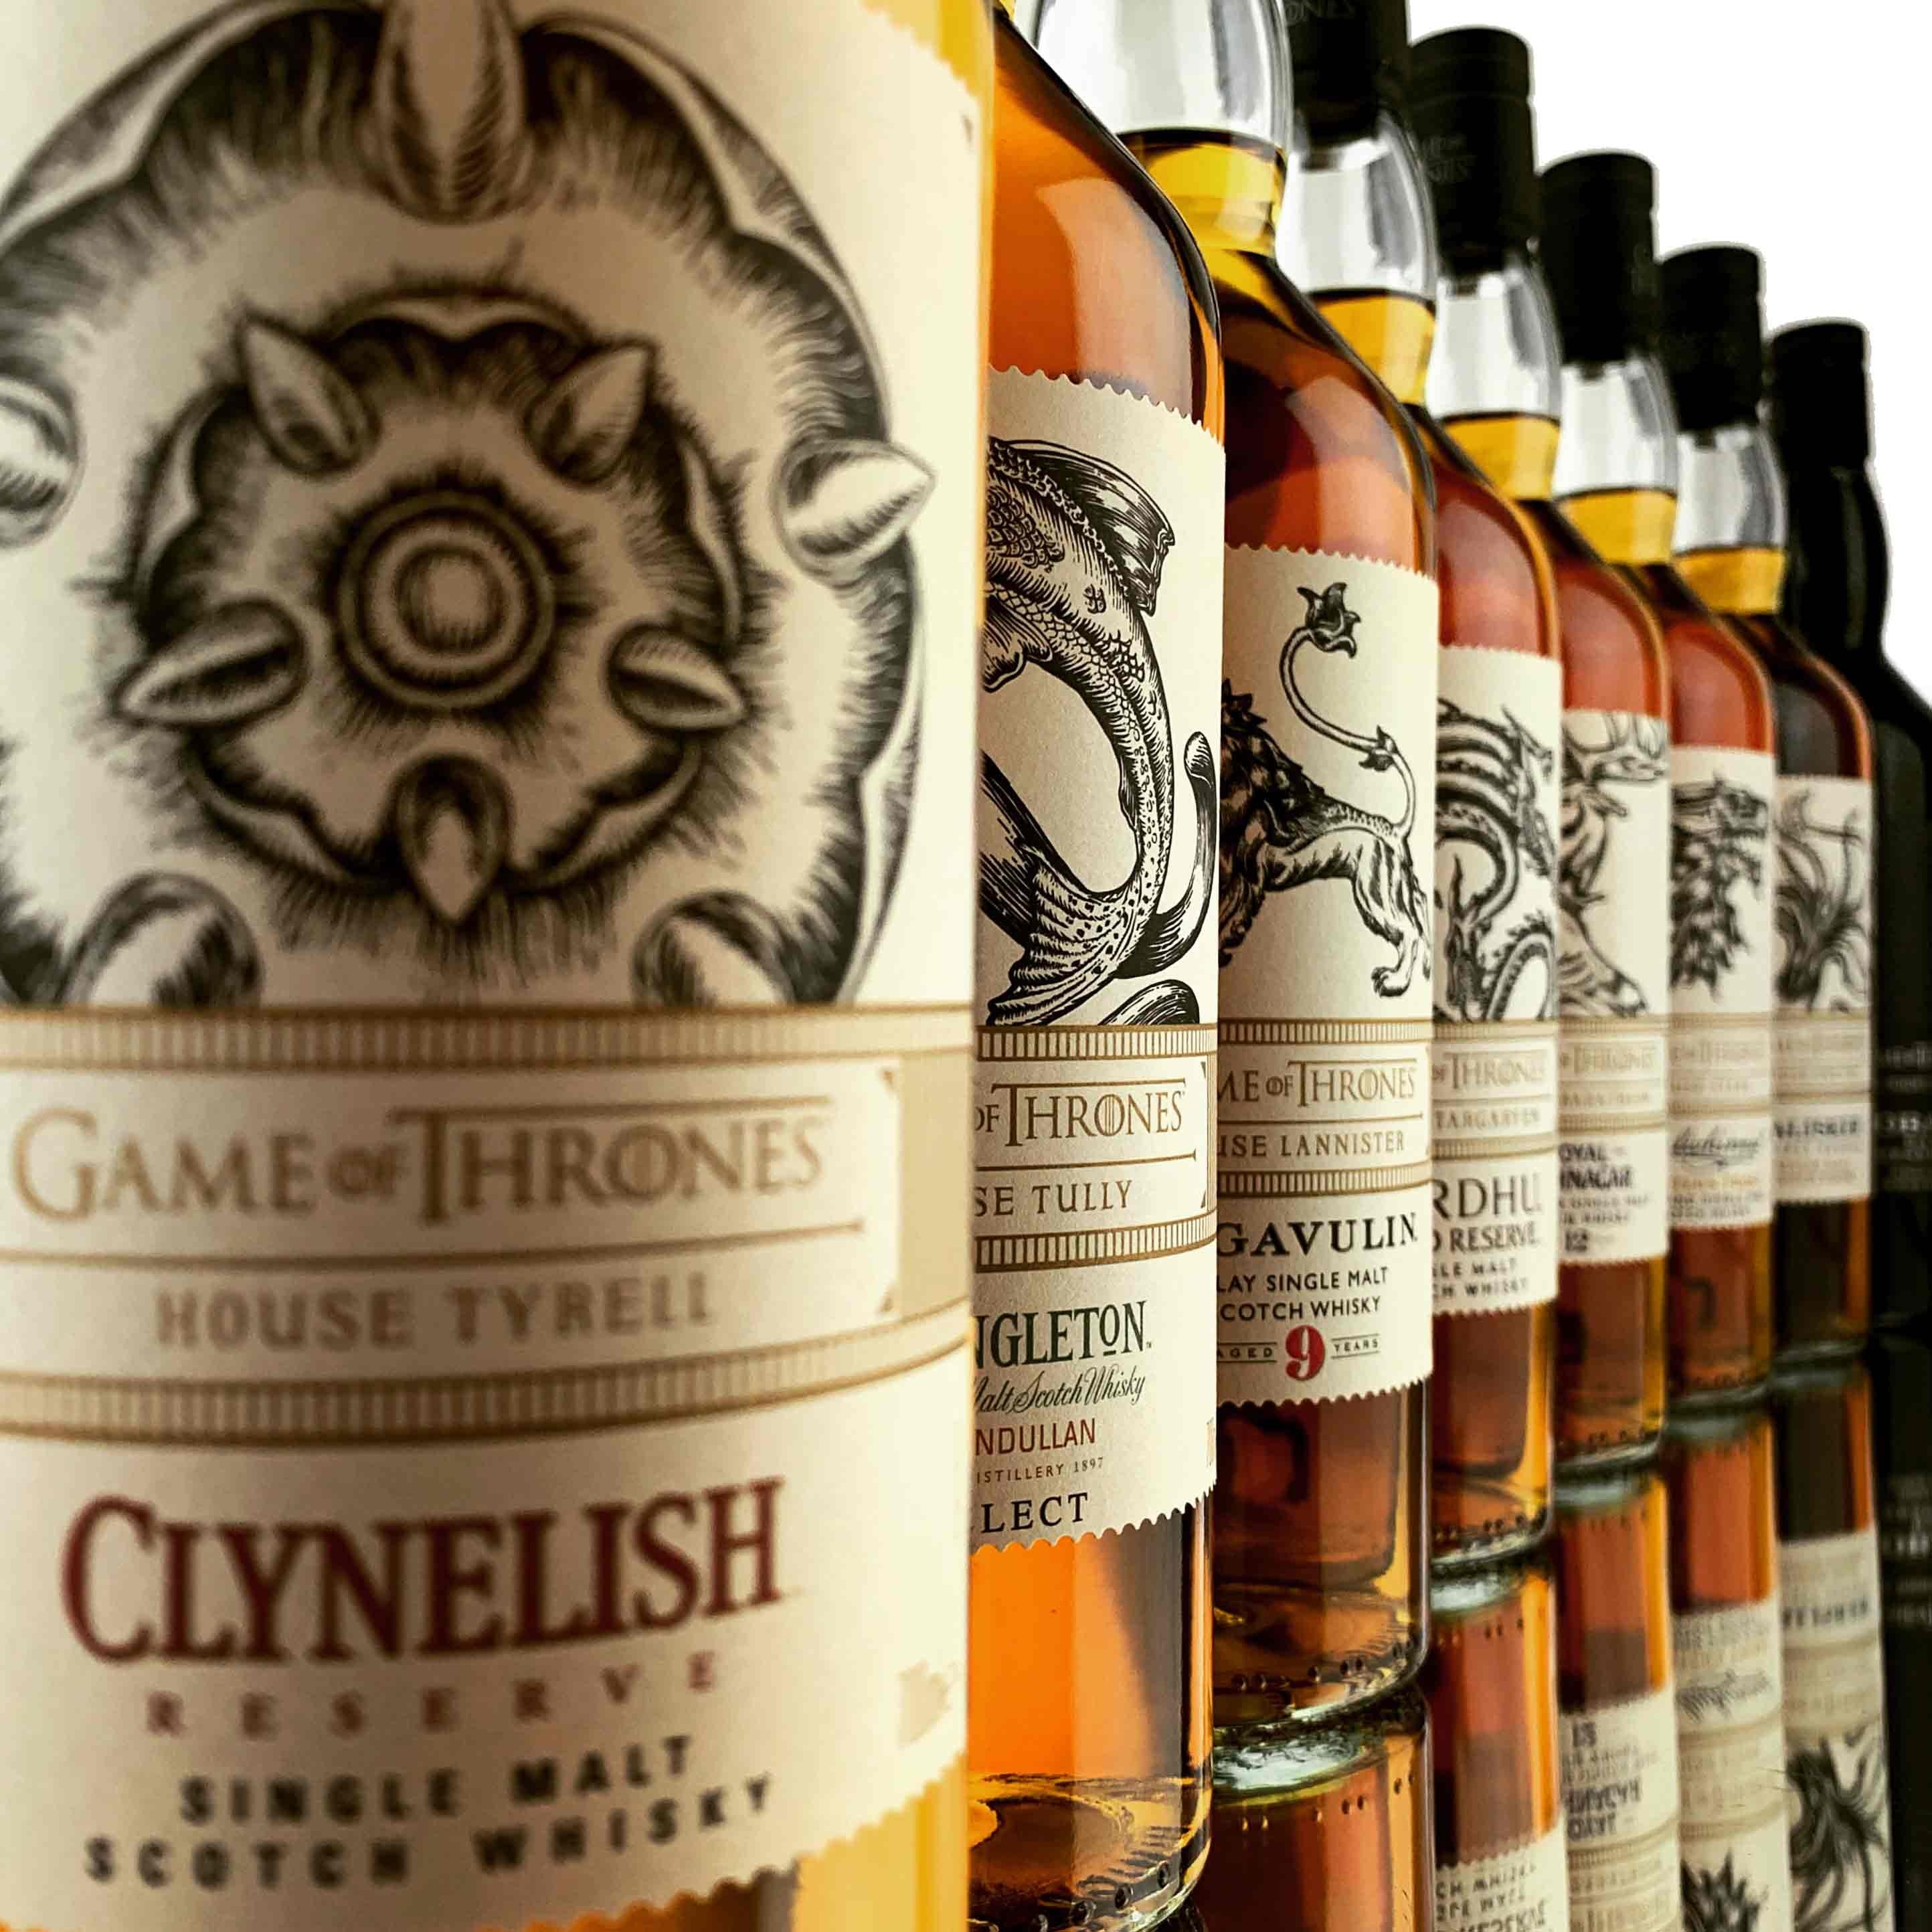 Game of Thrones Whisky Collection | 8 GoT Bottles